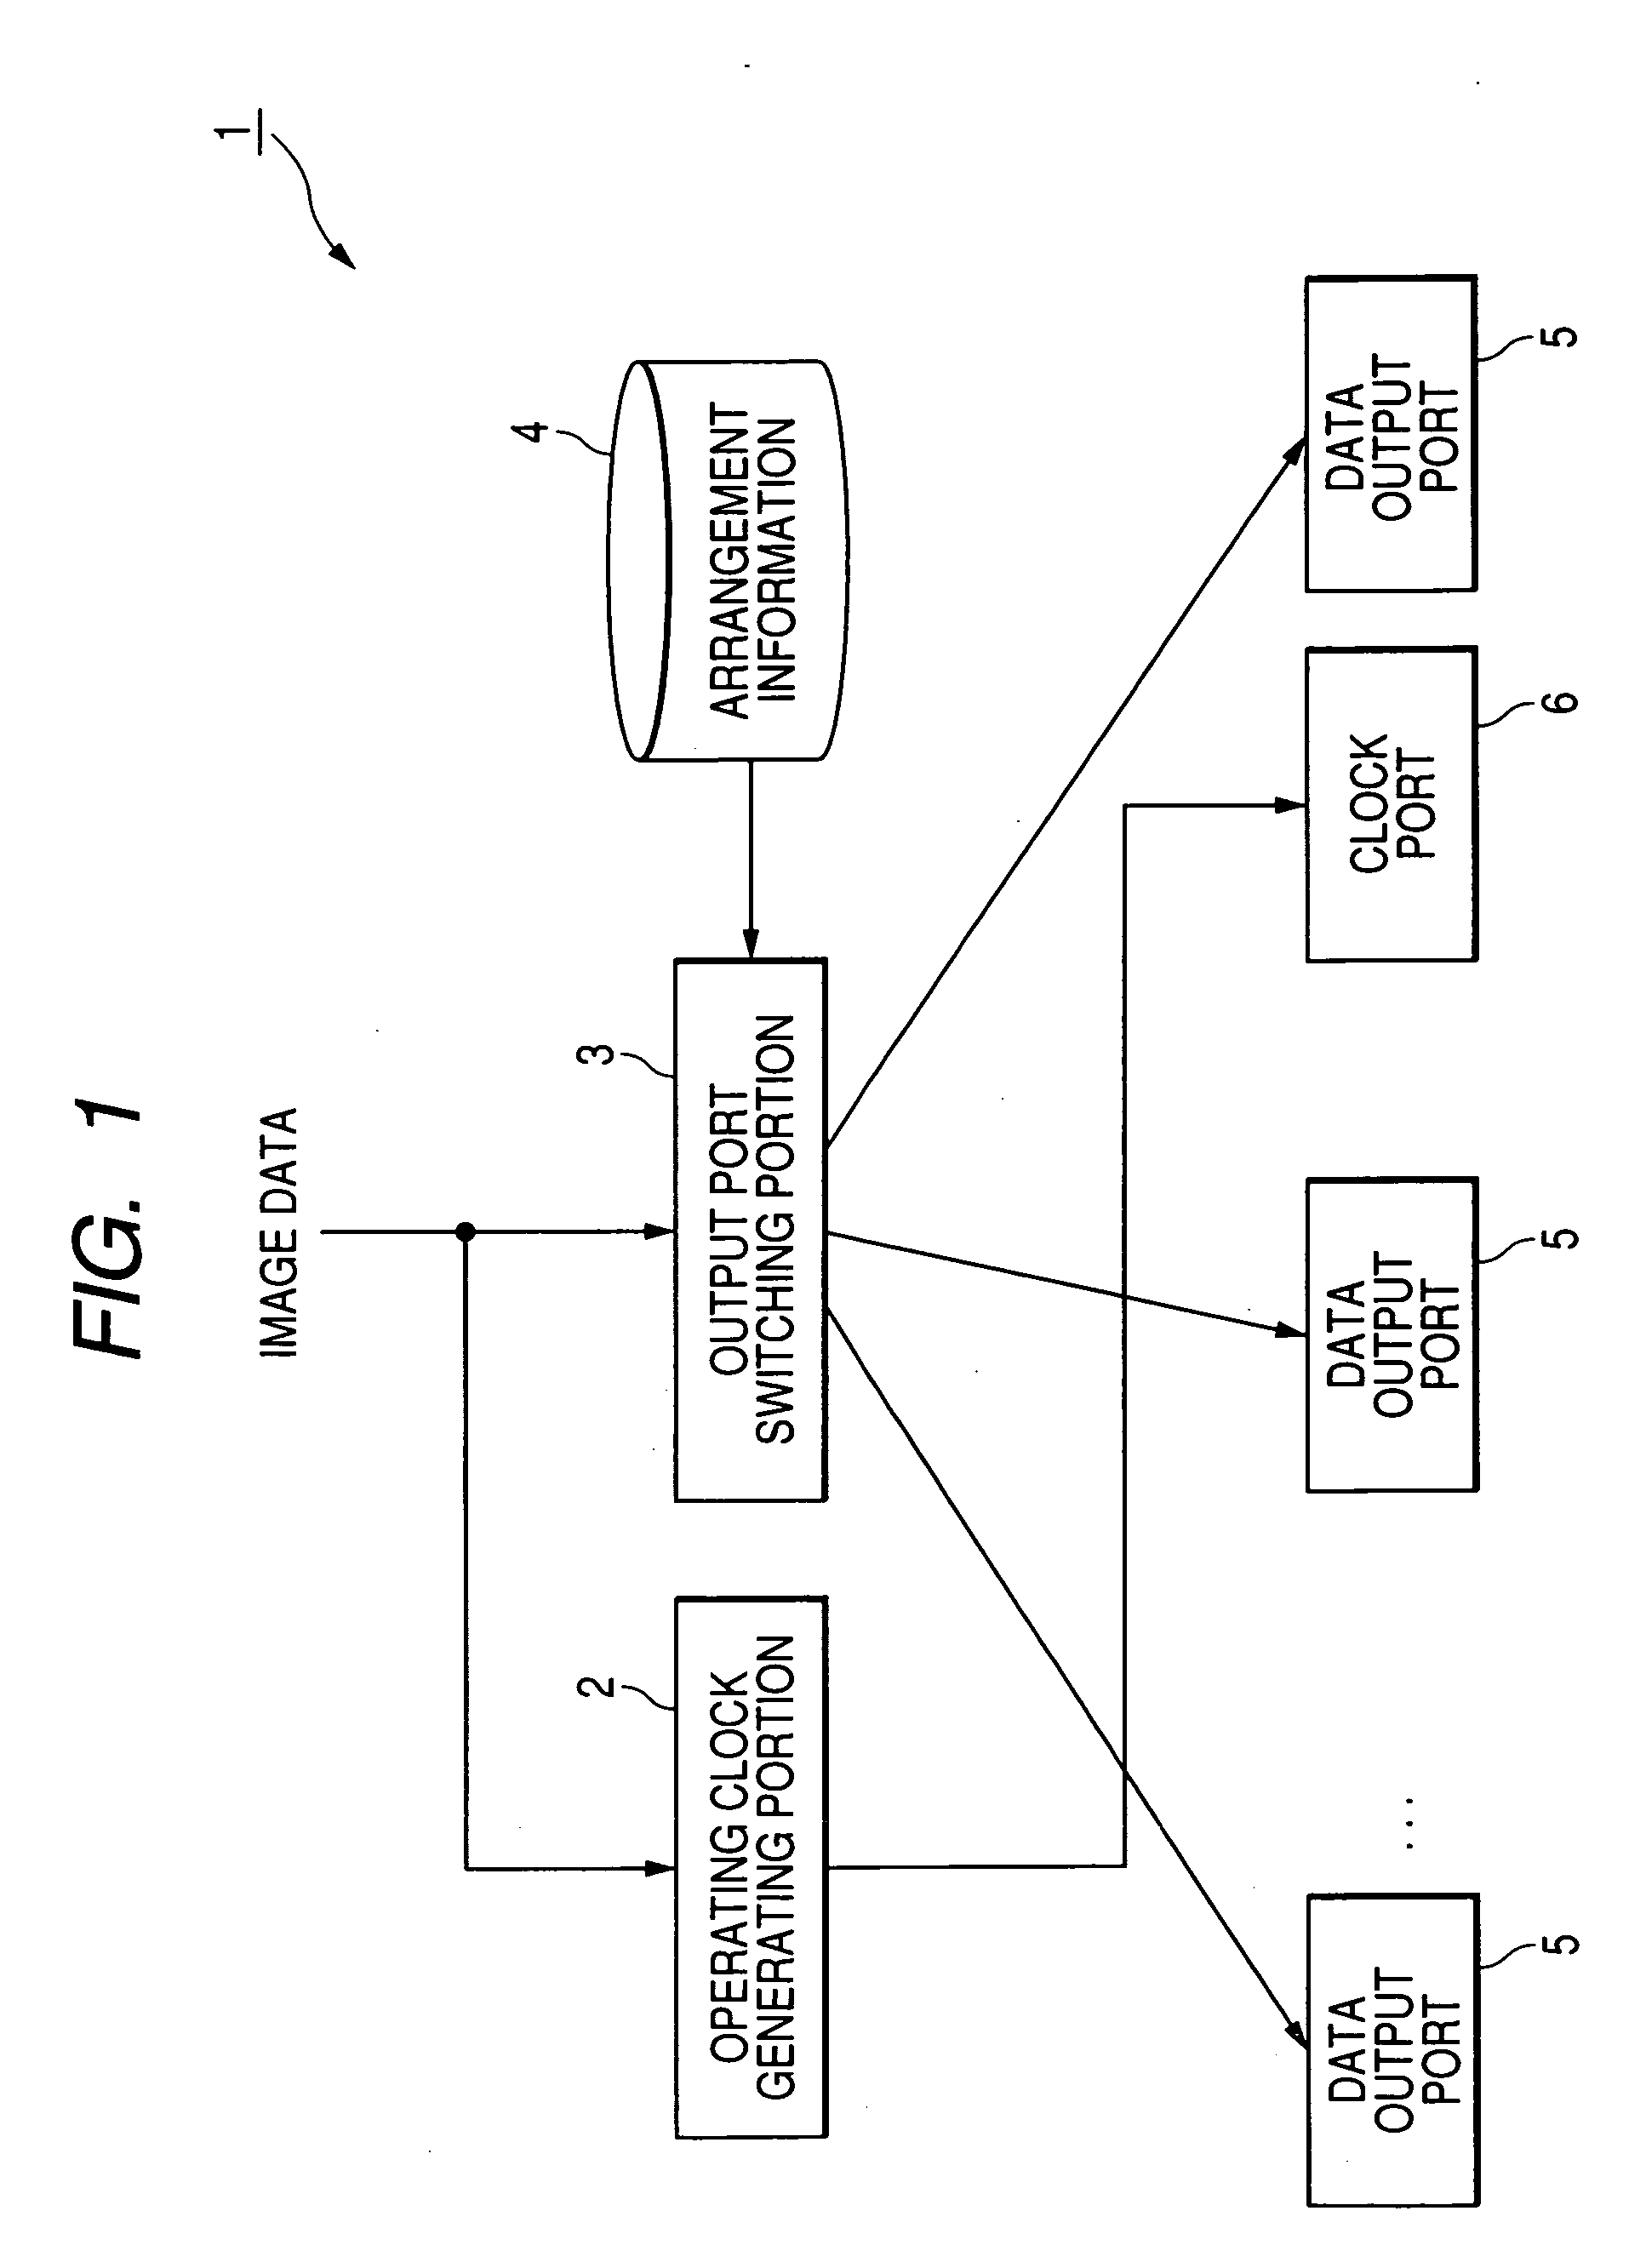 Image display apparatus, timing controller for driver IC, and source driver IC